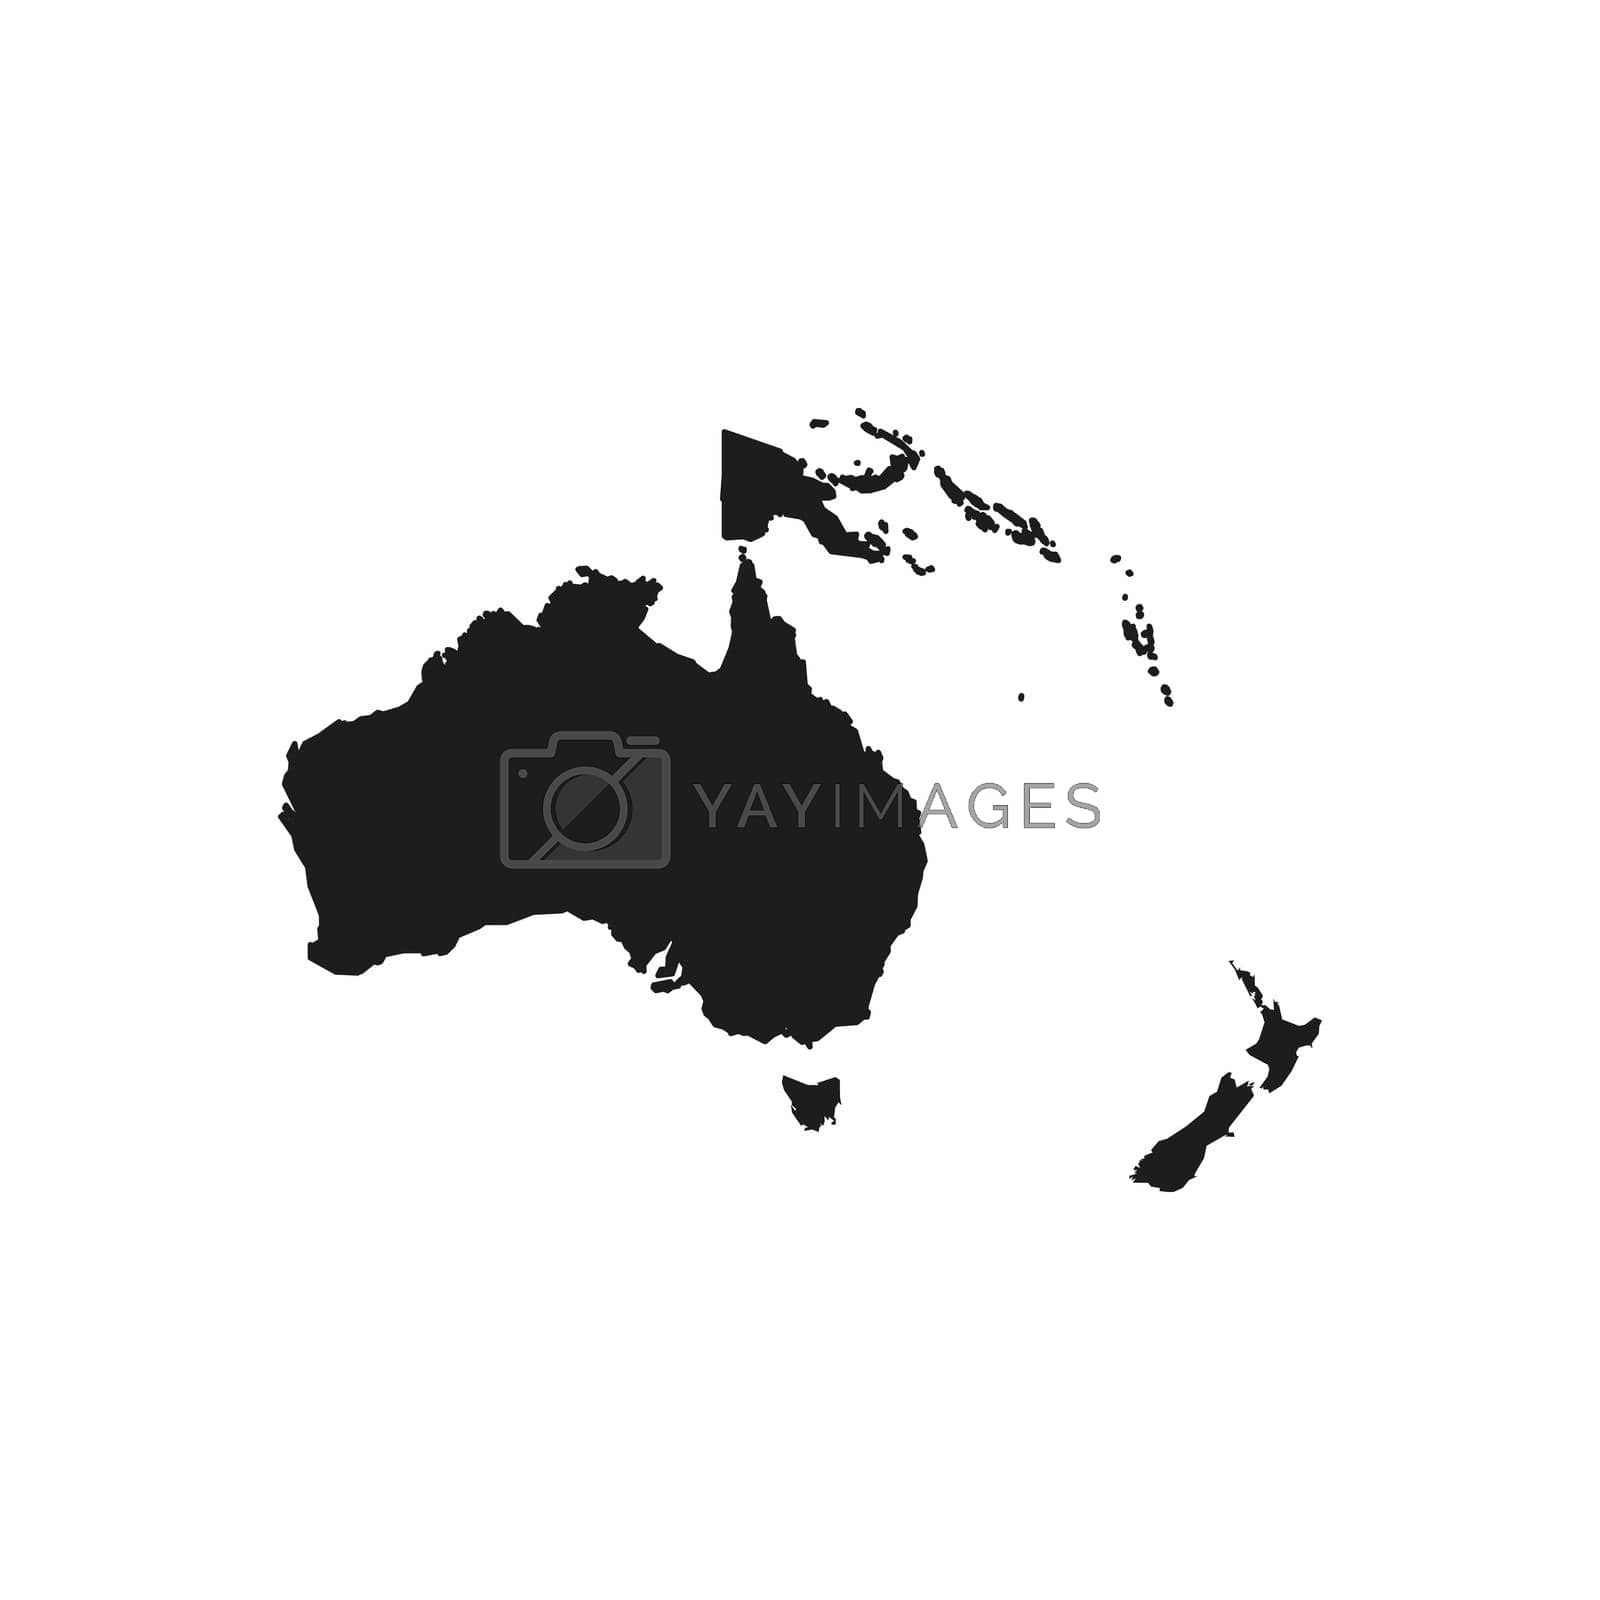 Royalty free image of Australia map vector, on white background, vector illustration. by Vertyb